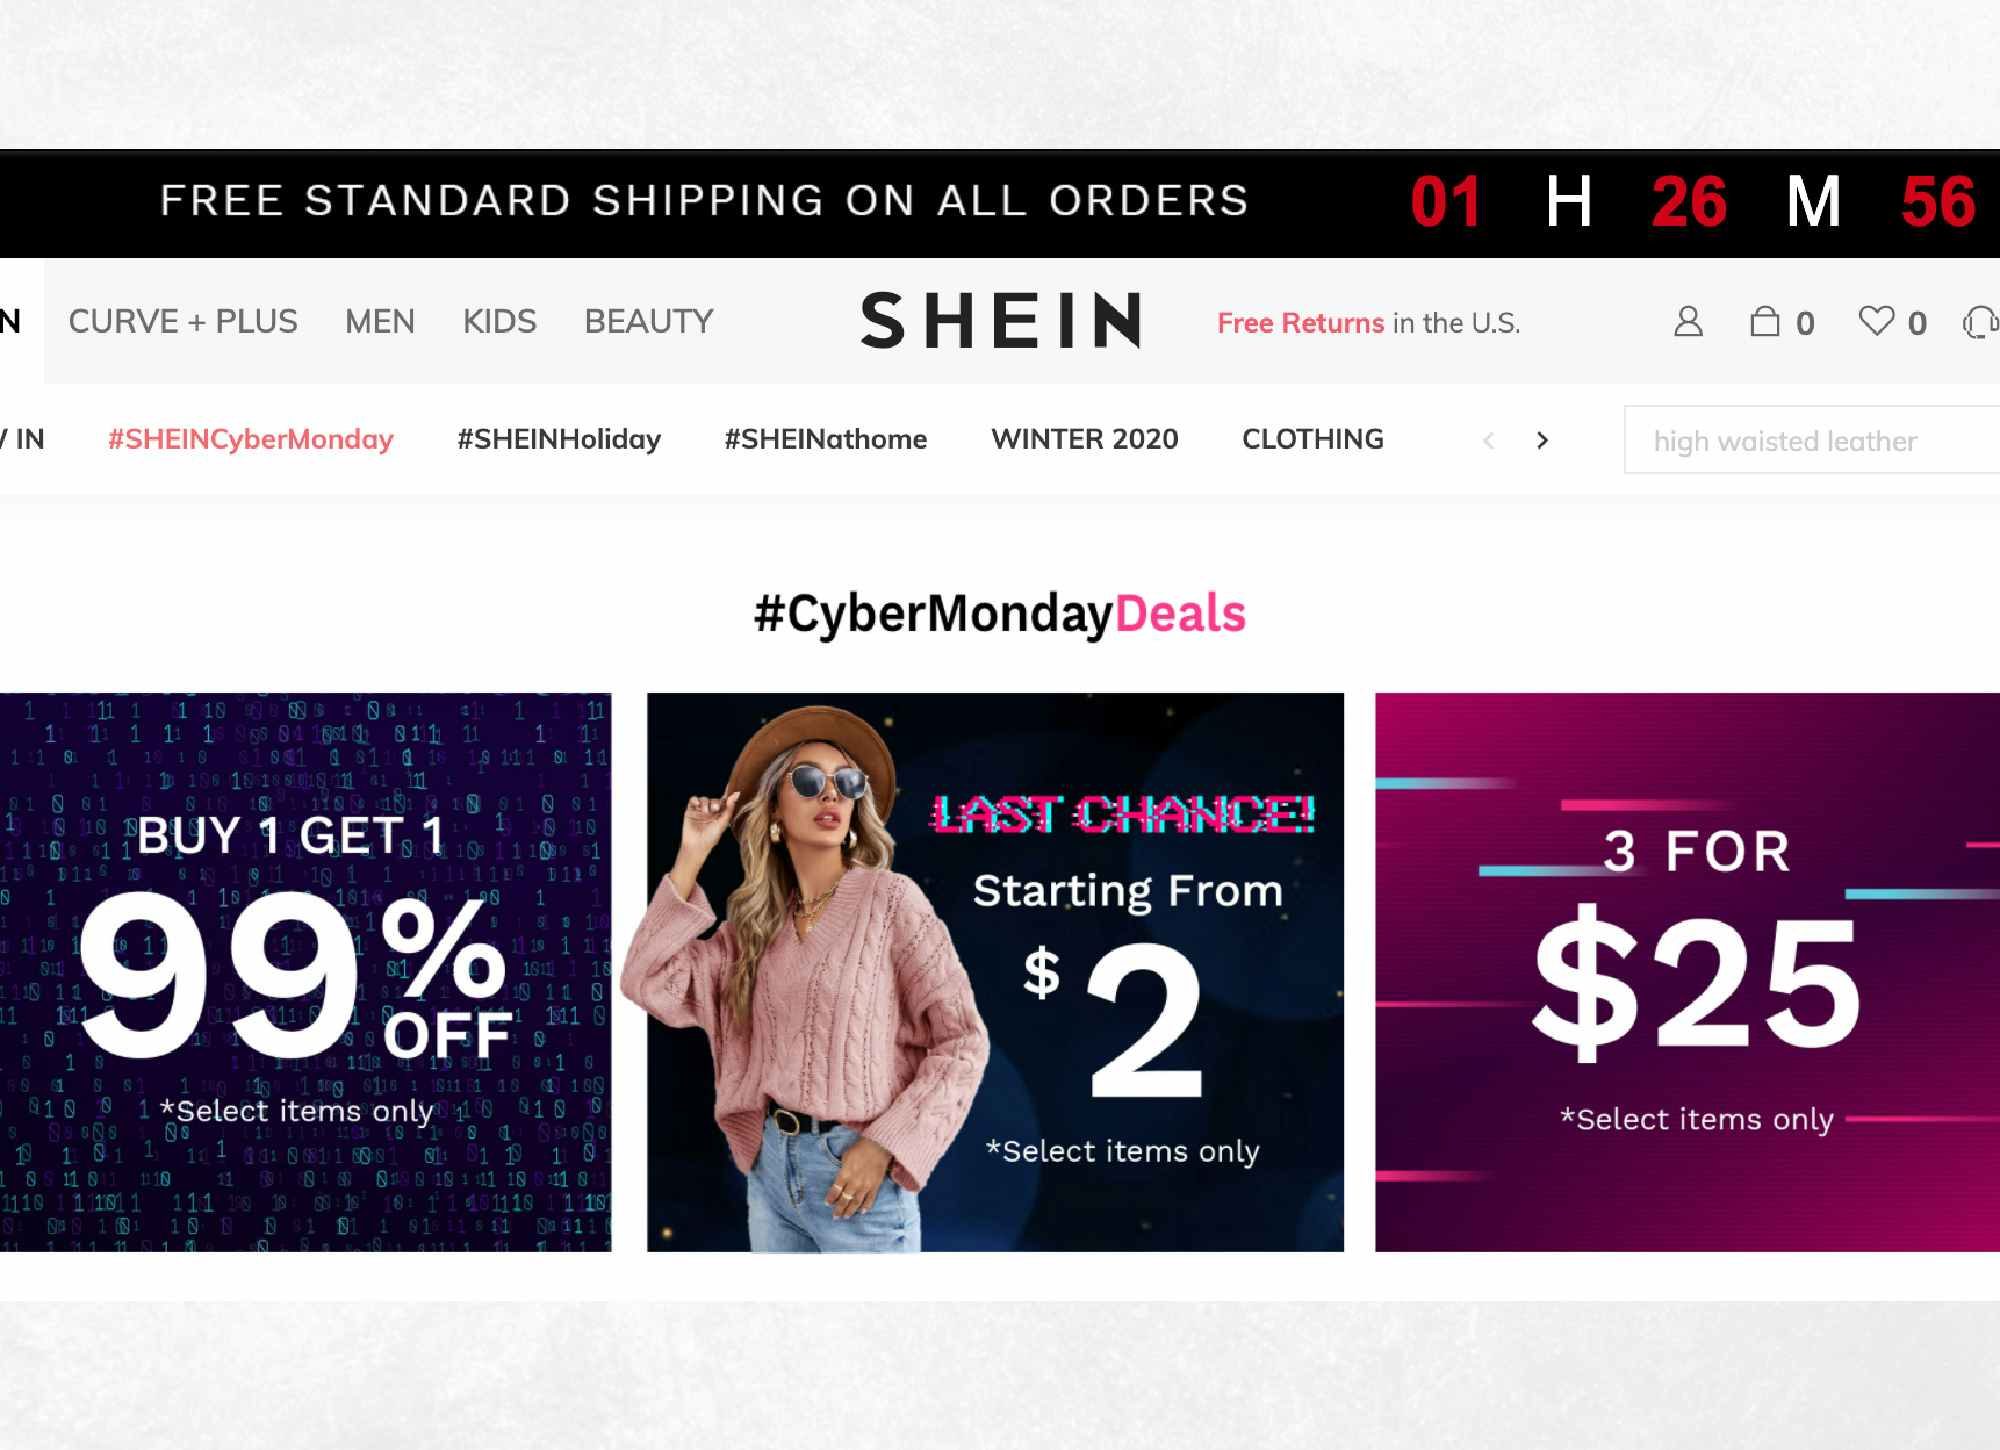 A SHEIN homepage screenshot of their Cyber Monday 2020 deals like buy one get one 99% off.